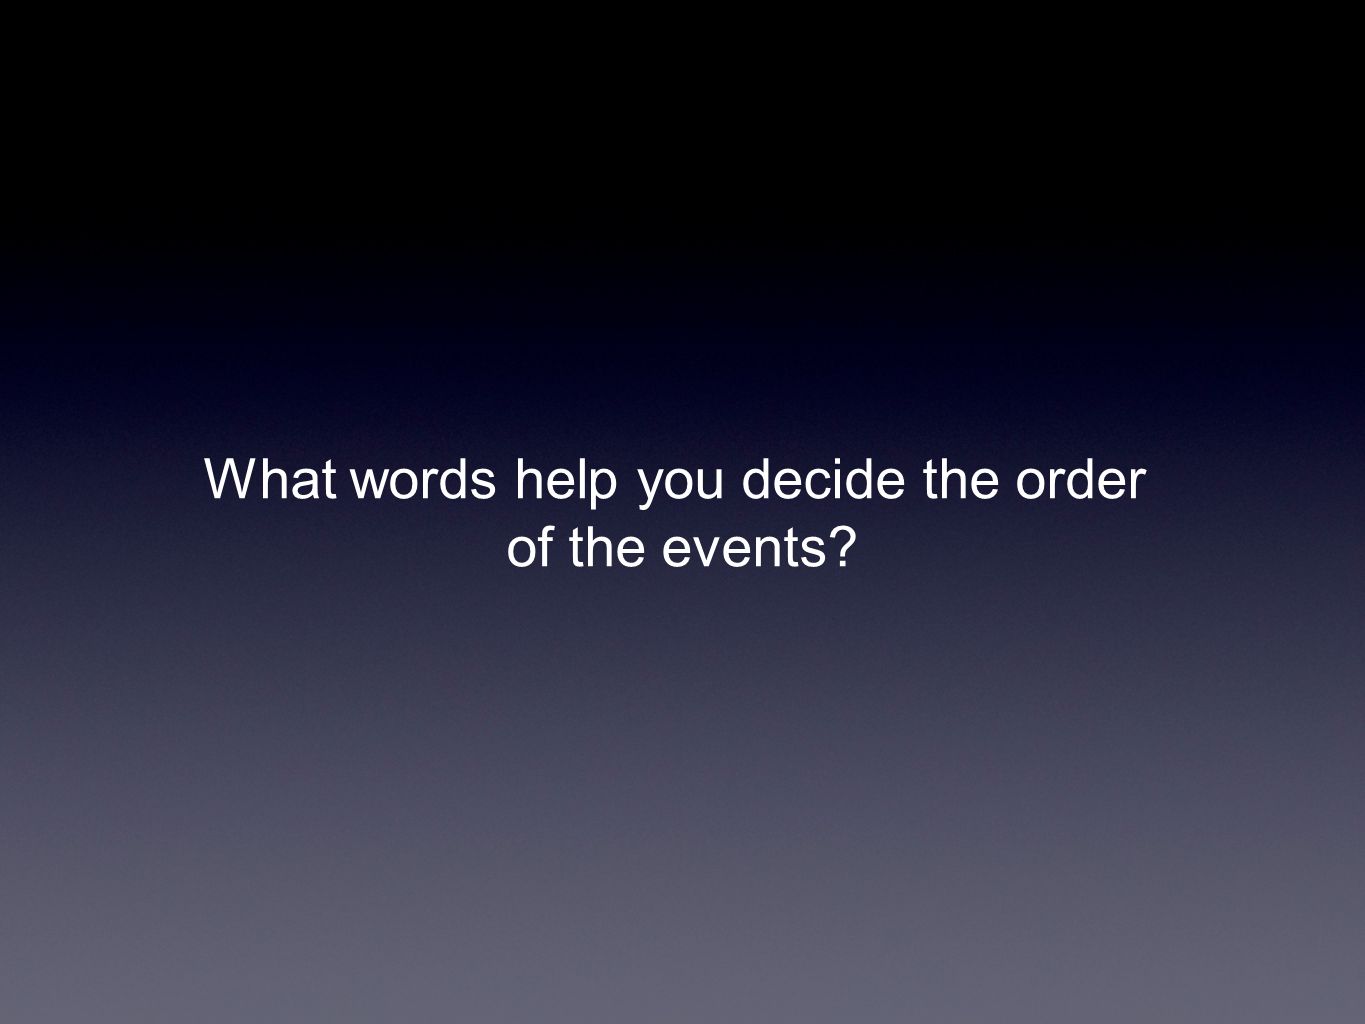 What words help you decide the order